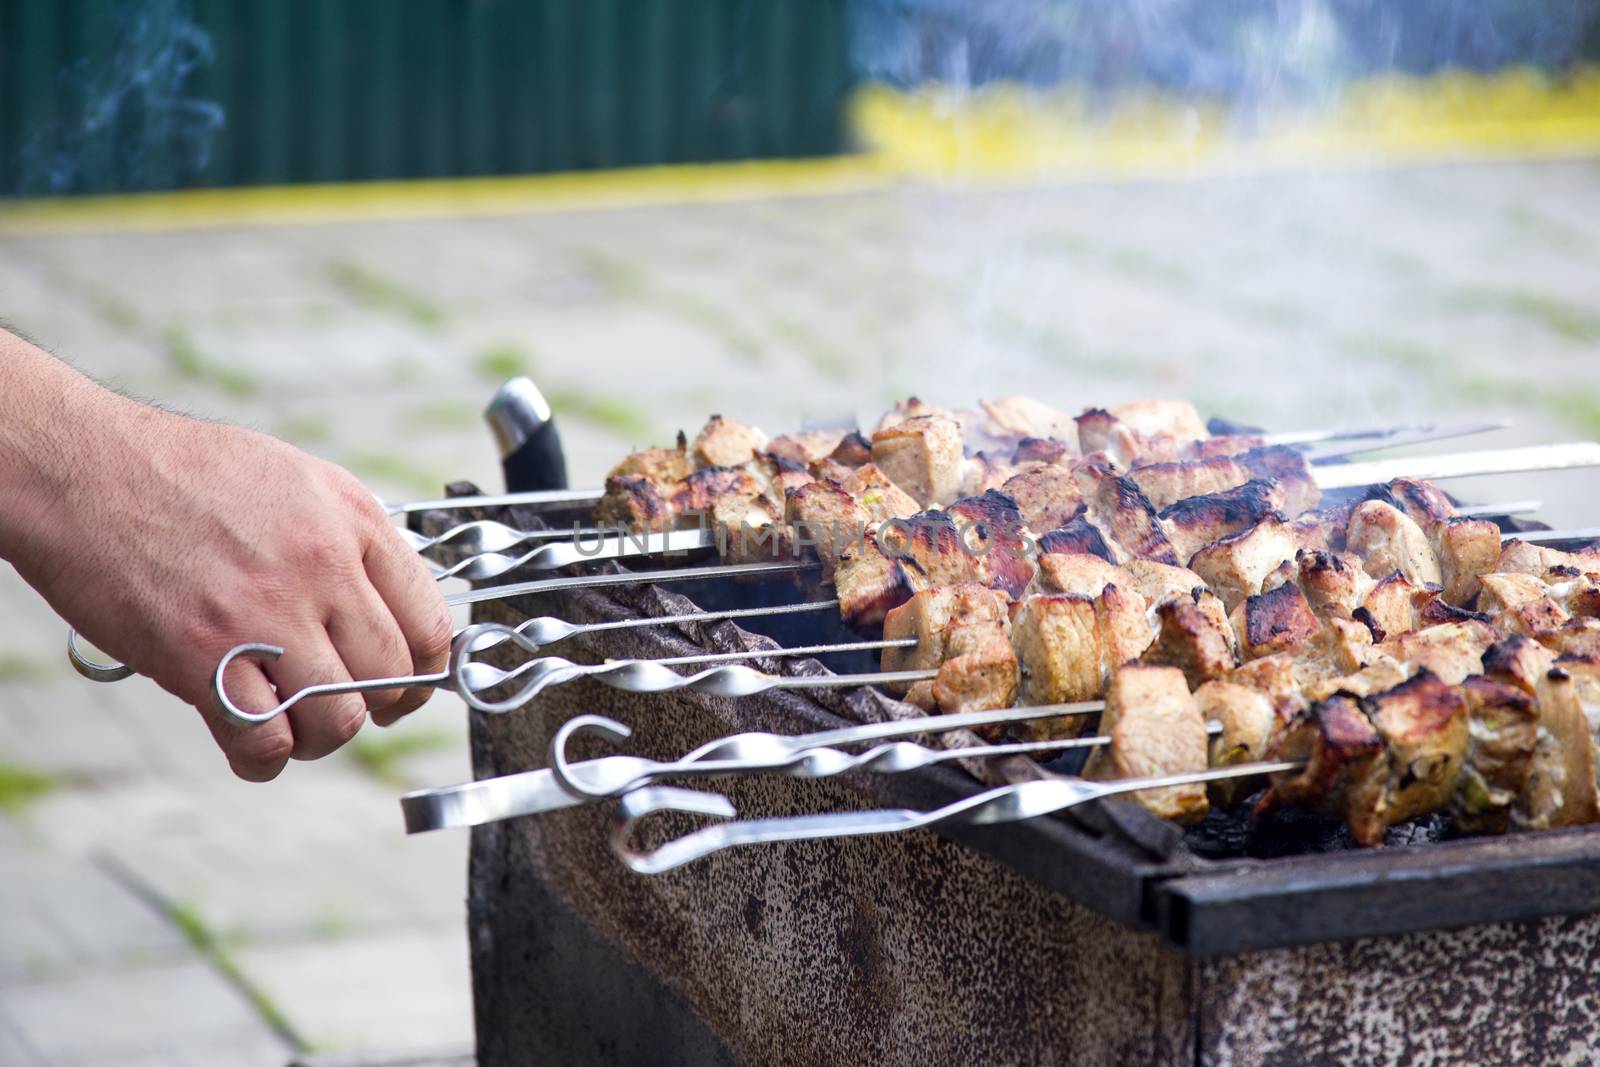 Grilled kebab cooking on metal skewer. Roasted meat cooked at barbecue. Traditional eastern dish, shish kebab. Grill on charcoal, picnic, street food